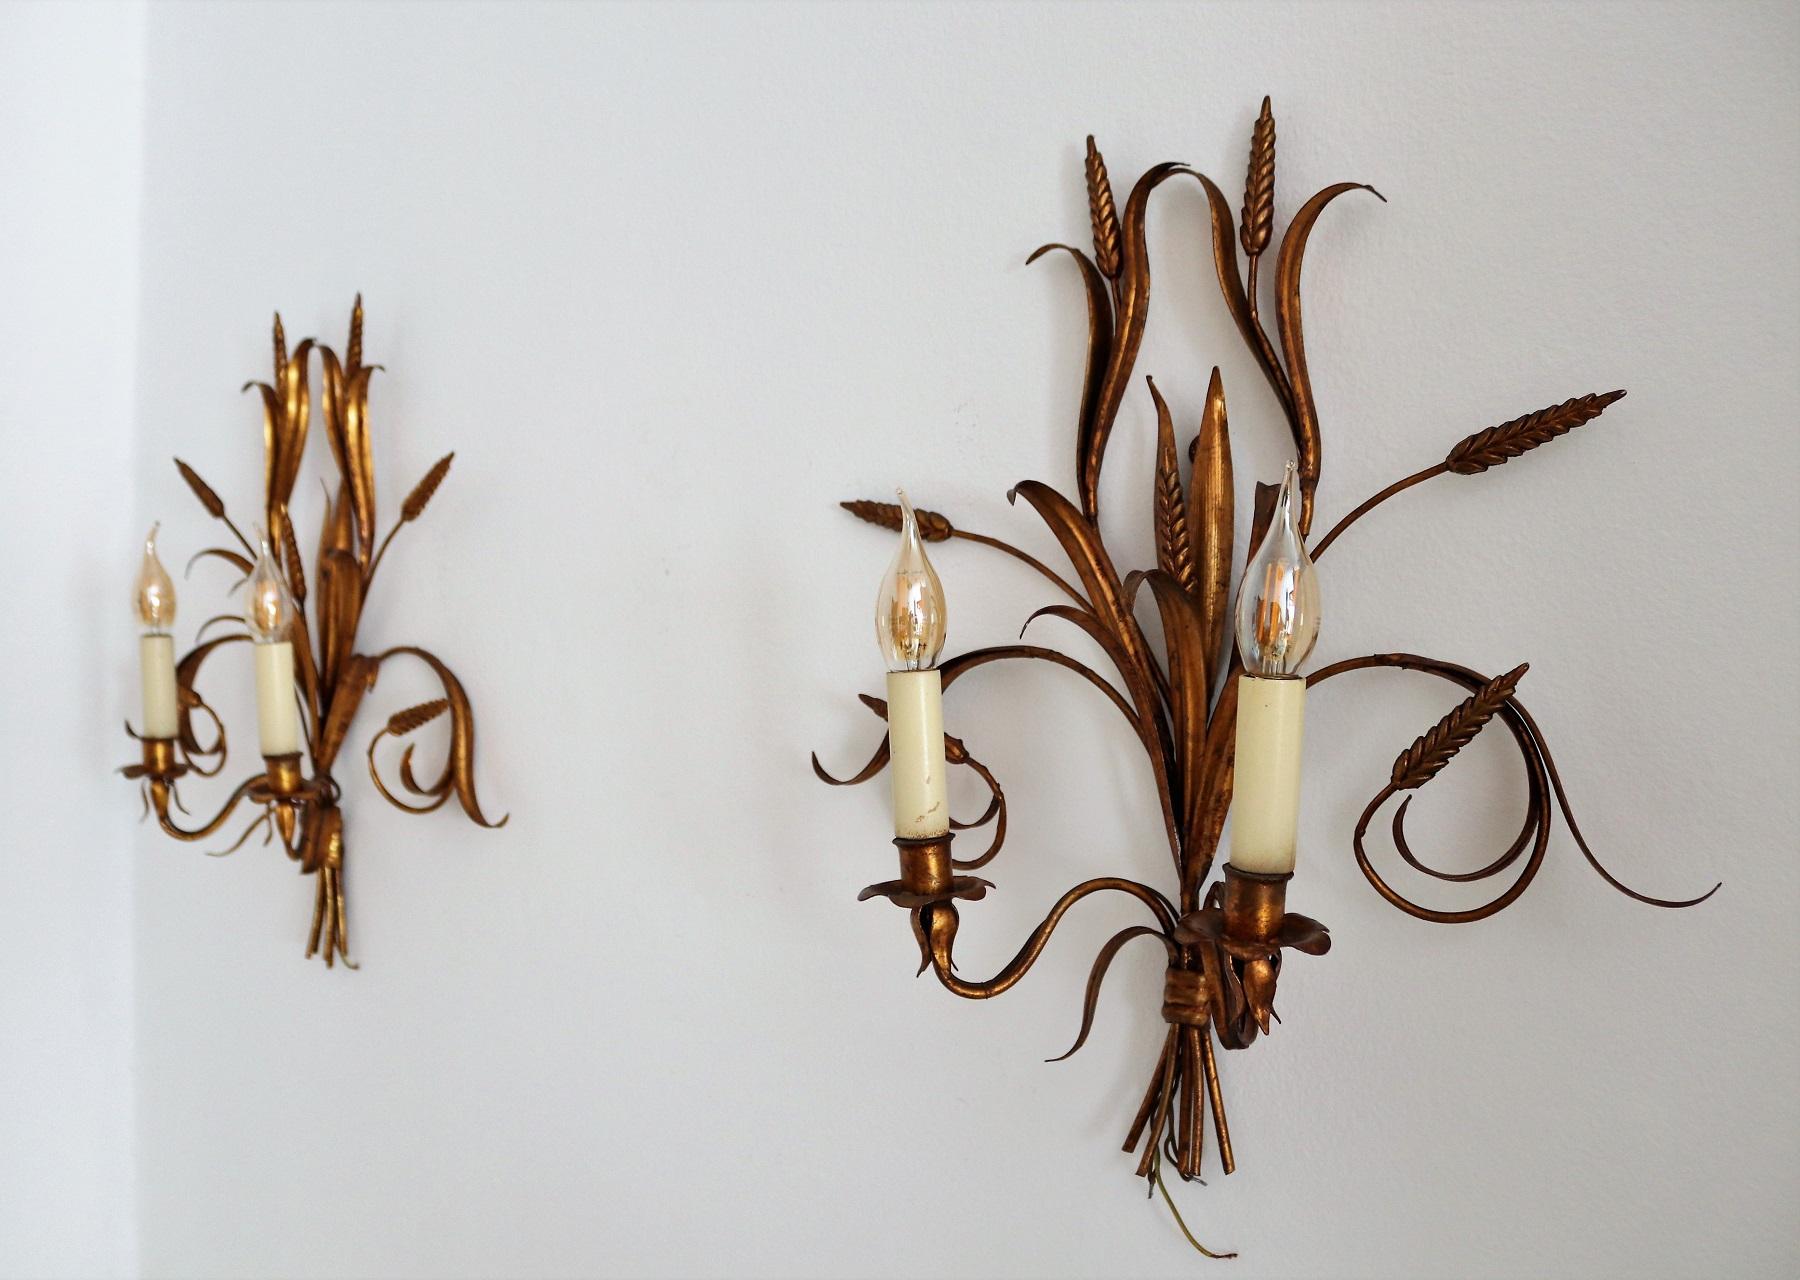 Italian Midcentury Gilt Tole Wall Sconces with Wheat Sheaf, 1950s, Set of Five For Sale 3